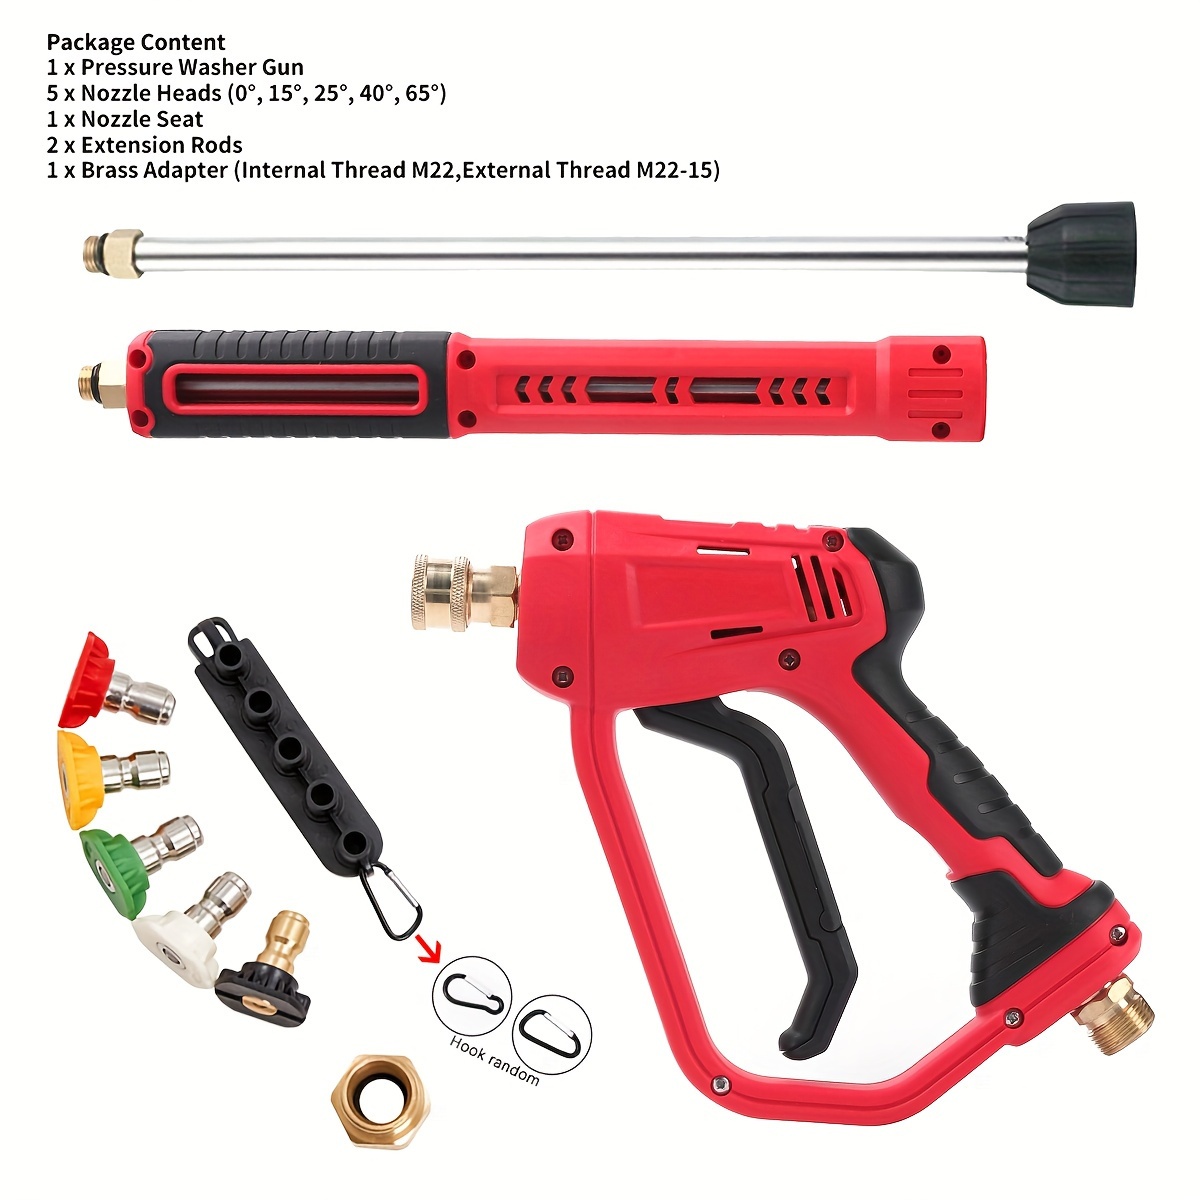 

1 Pack, 4000 Psi High Pressure Washer Gun Kit With 5 Nozzle Heads & 2 Extension Wands, 3 Lengths, M22-14 Inlet, 1/4" Quick Connector Outlet, Adjustable Power Spray Gun For Outdoor Garden Yard Cleaning